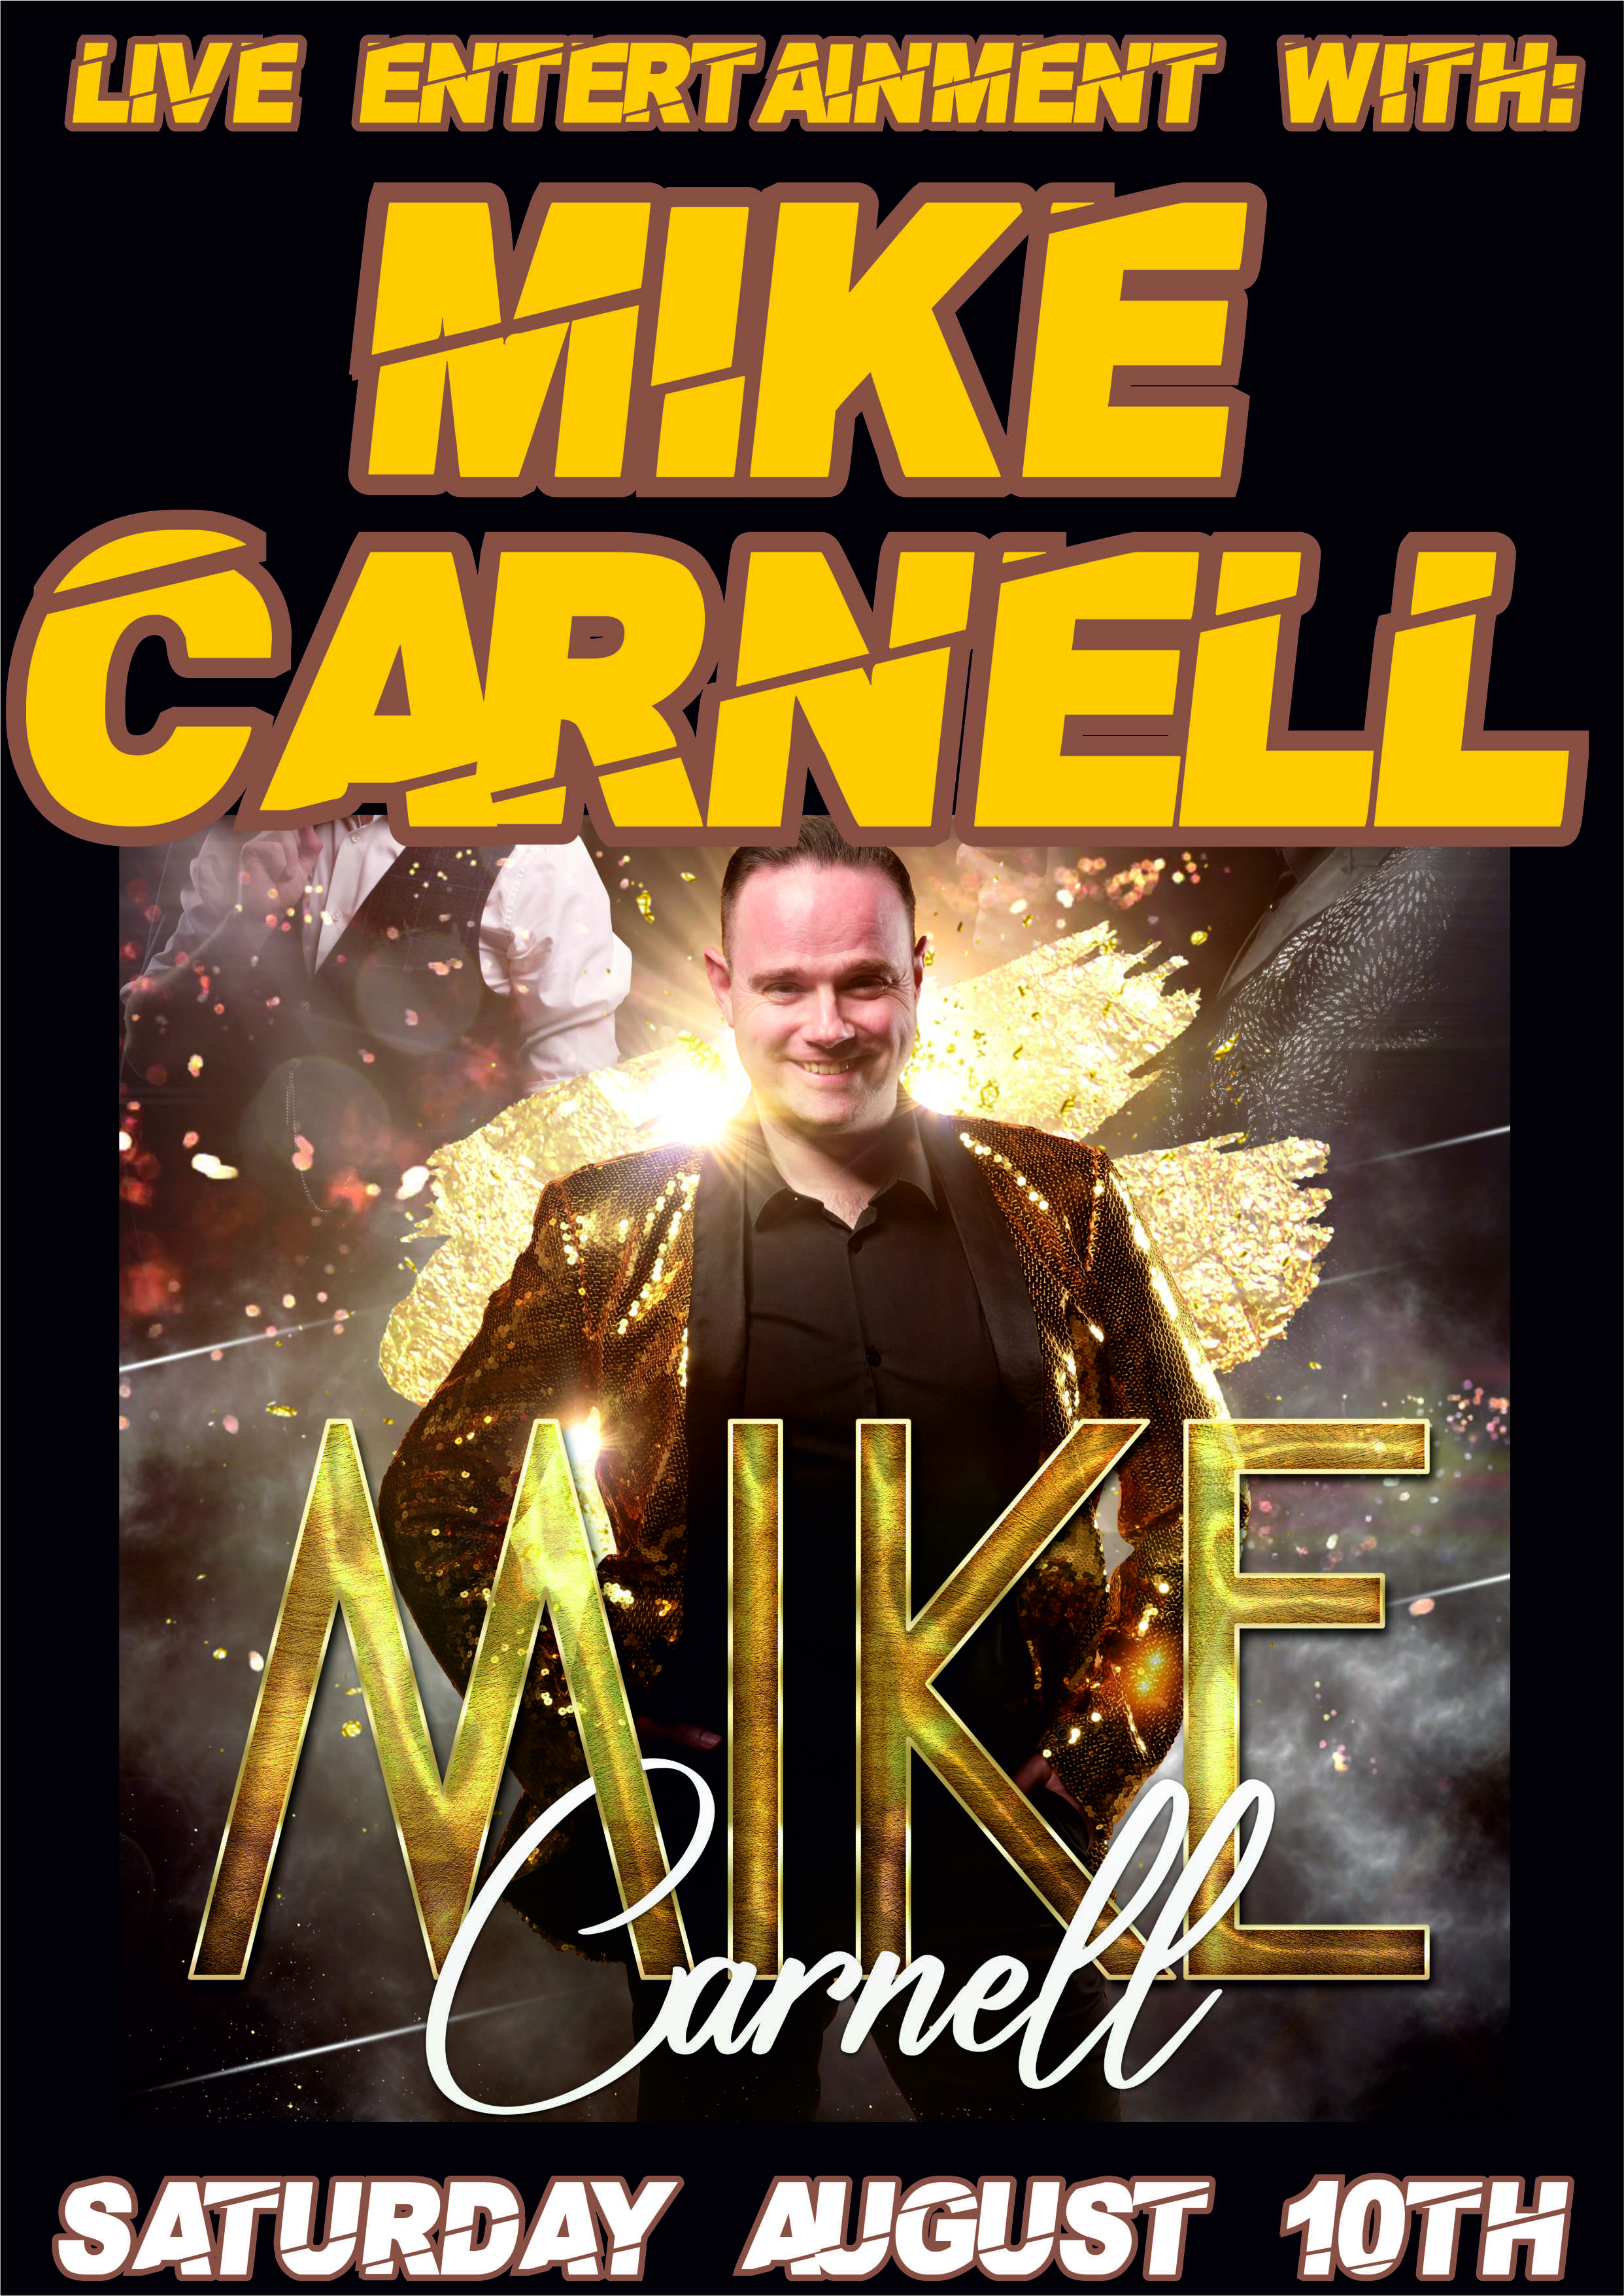 Live Entertainment with Mike Carnell